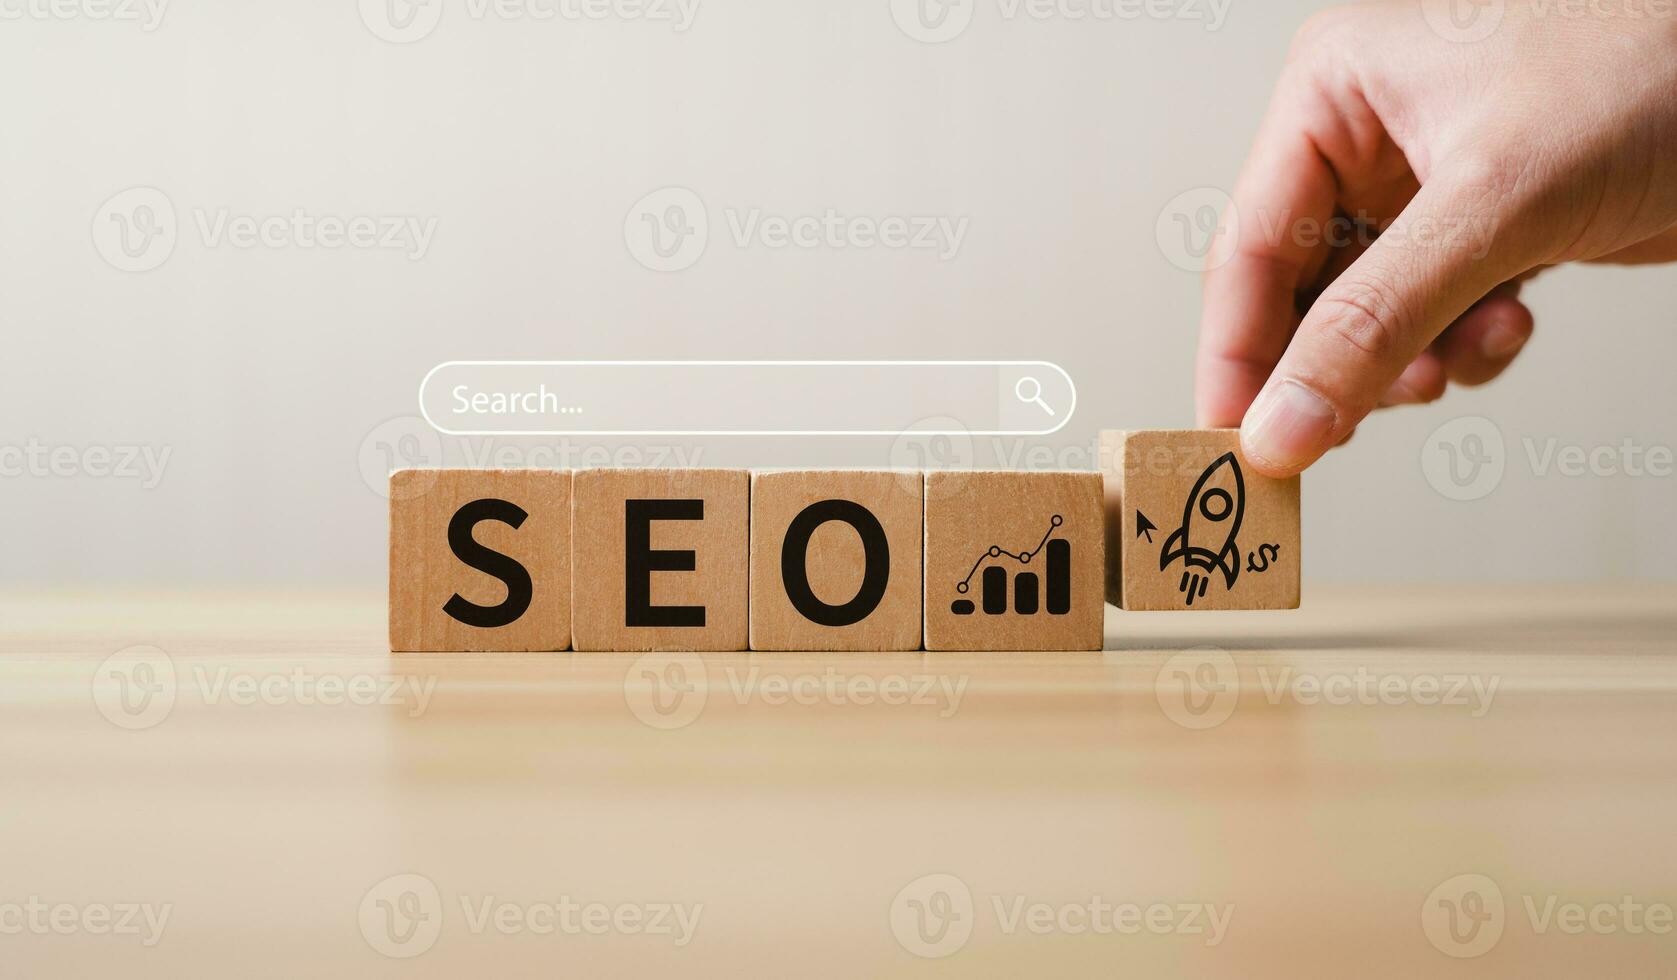 business people use SEO tools, Unlocking online potential. Boost visibility, attract organic traffic, and dominate search engine rankings with strategic optimization techniques. digital marketing photo